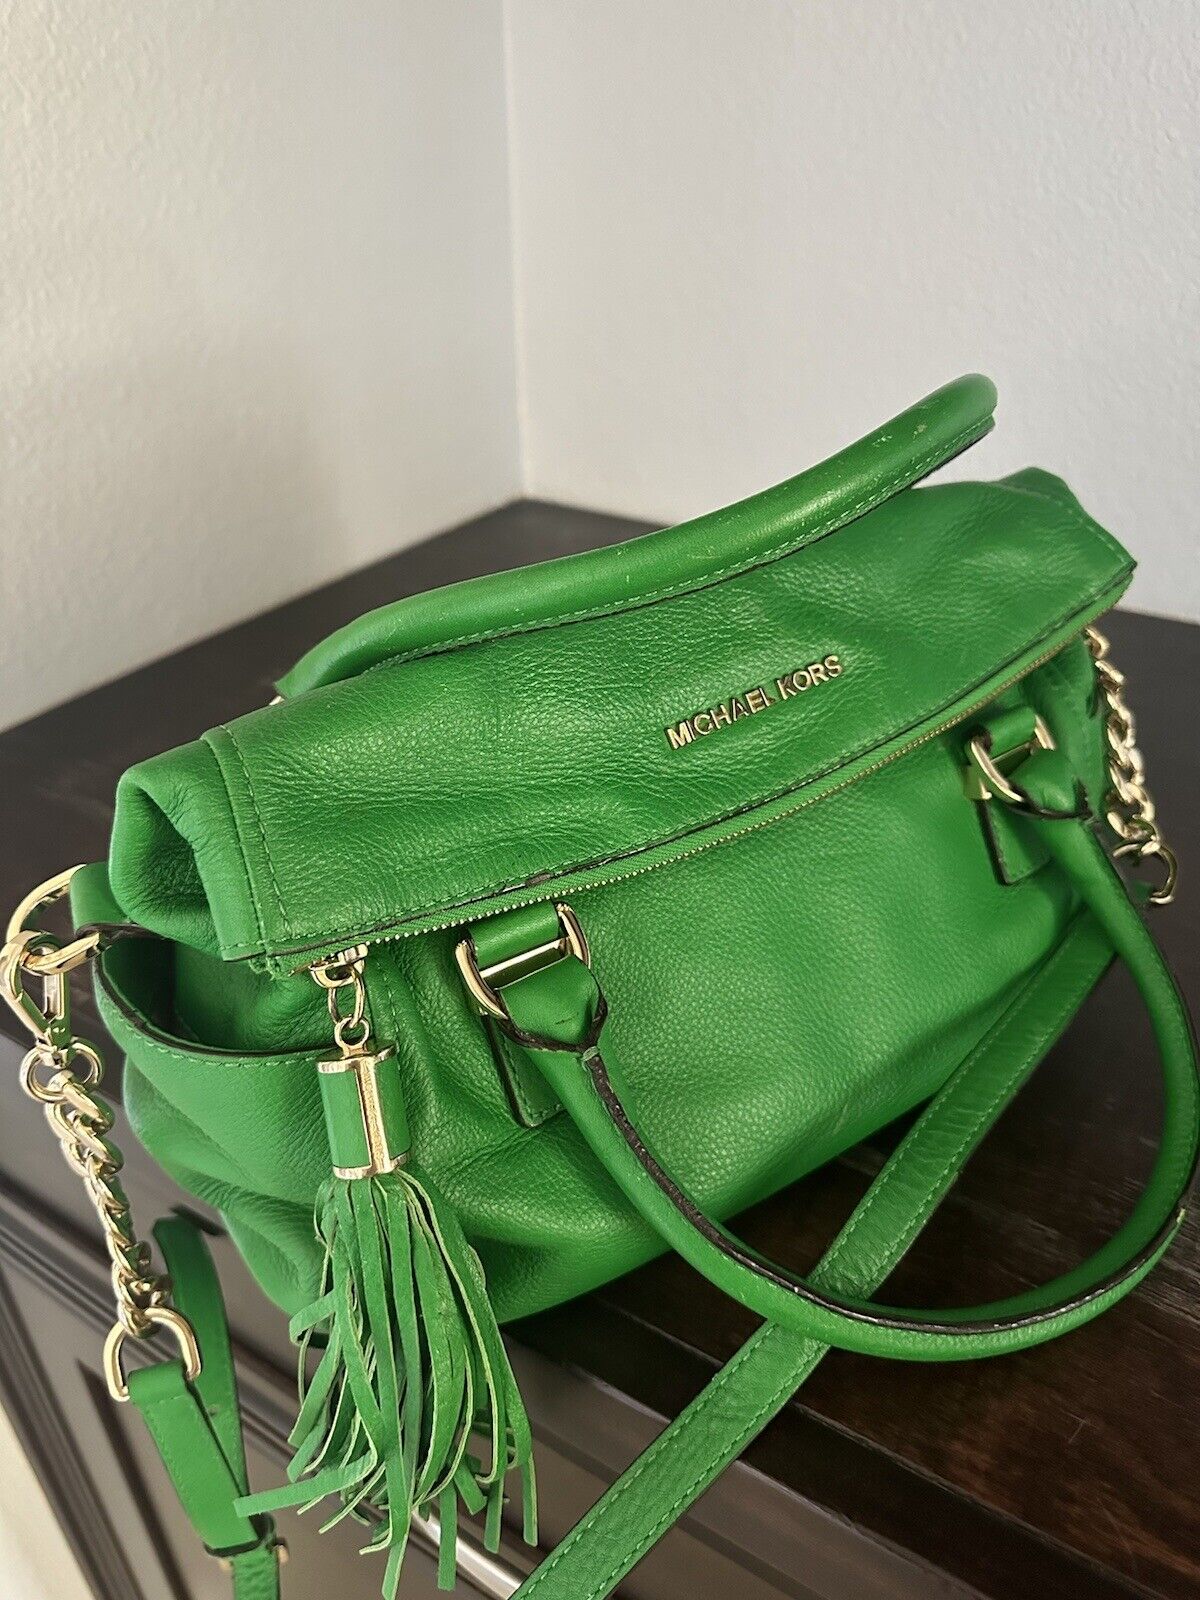 Authentic Michael Kors beautiful green leather 2-… - image 4